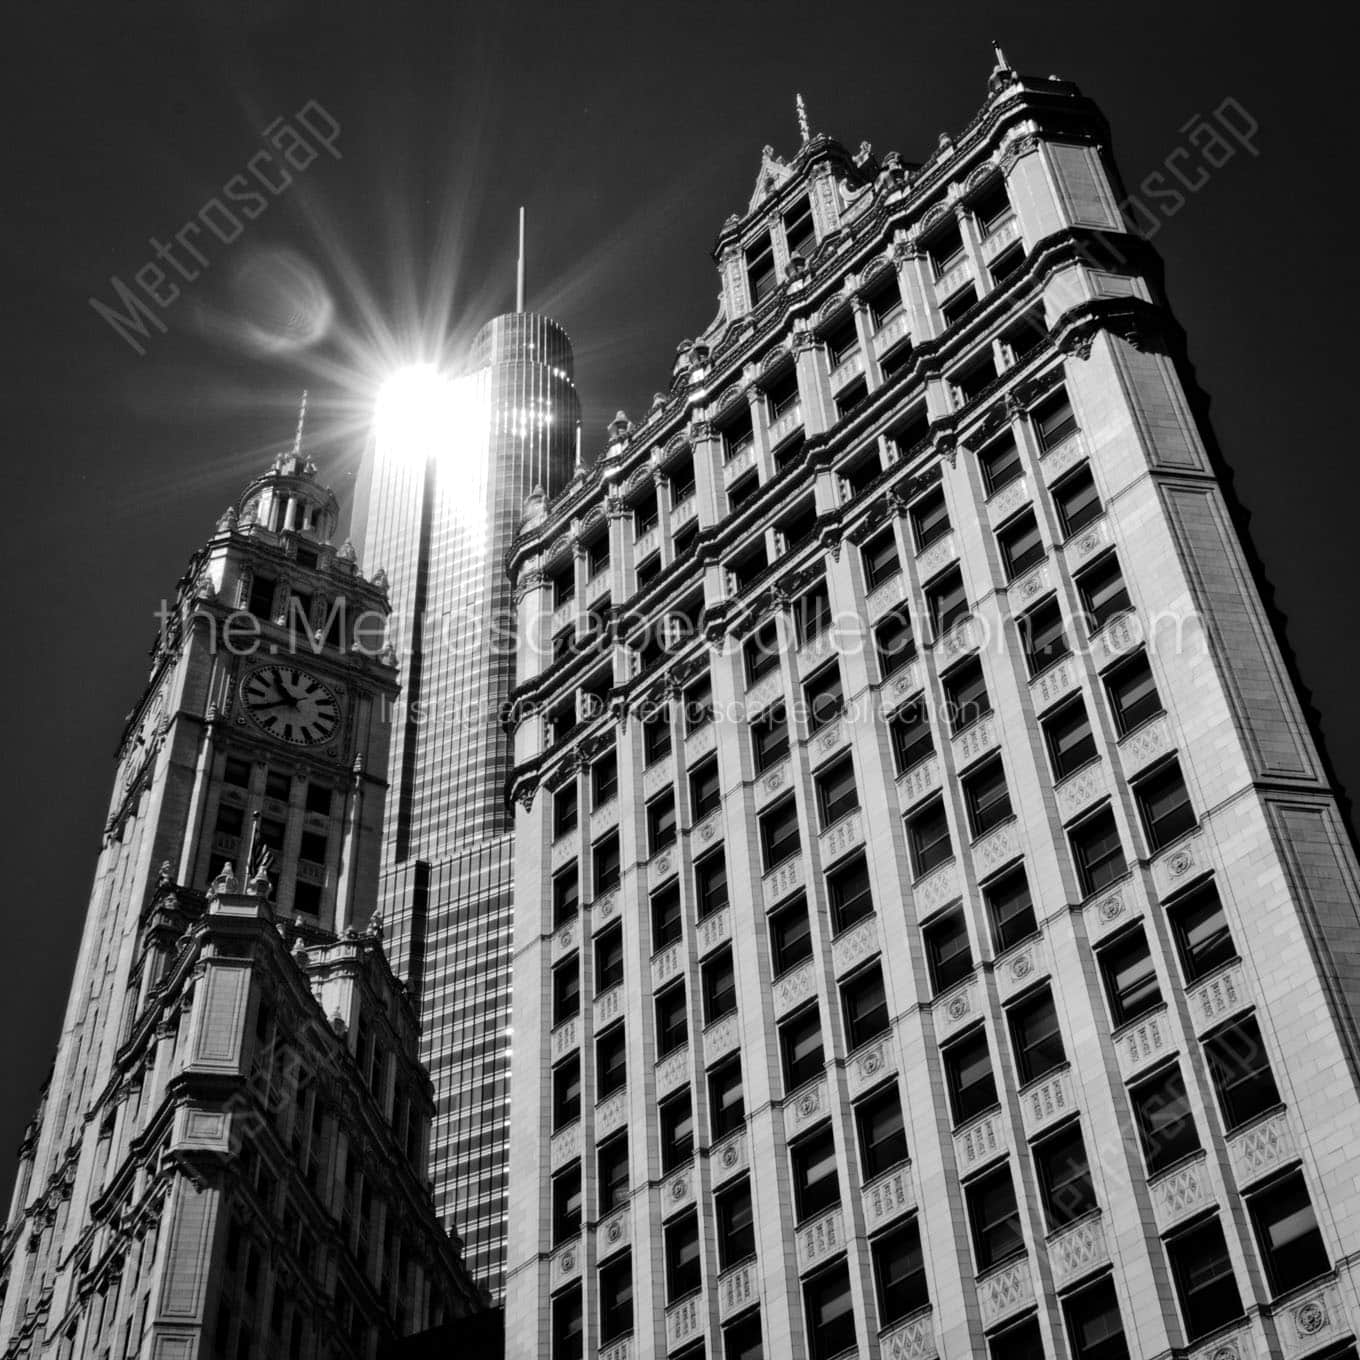 sun reflection off trump tower over wrigley building Black & White Office Art